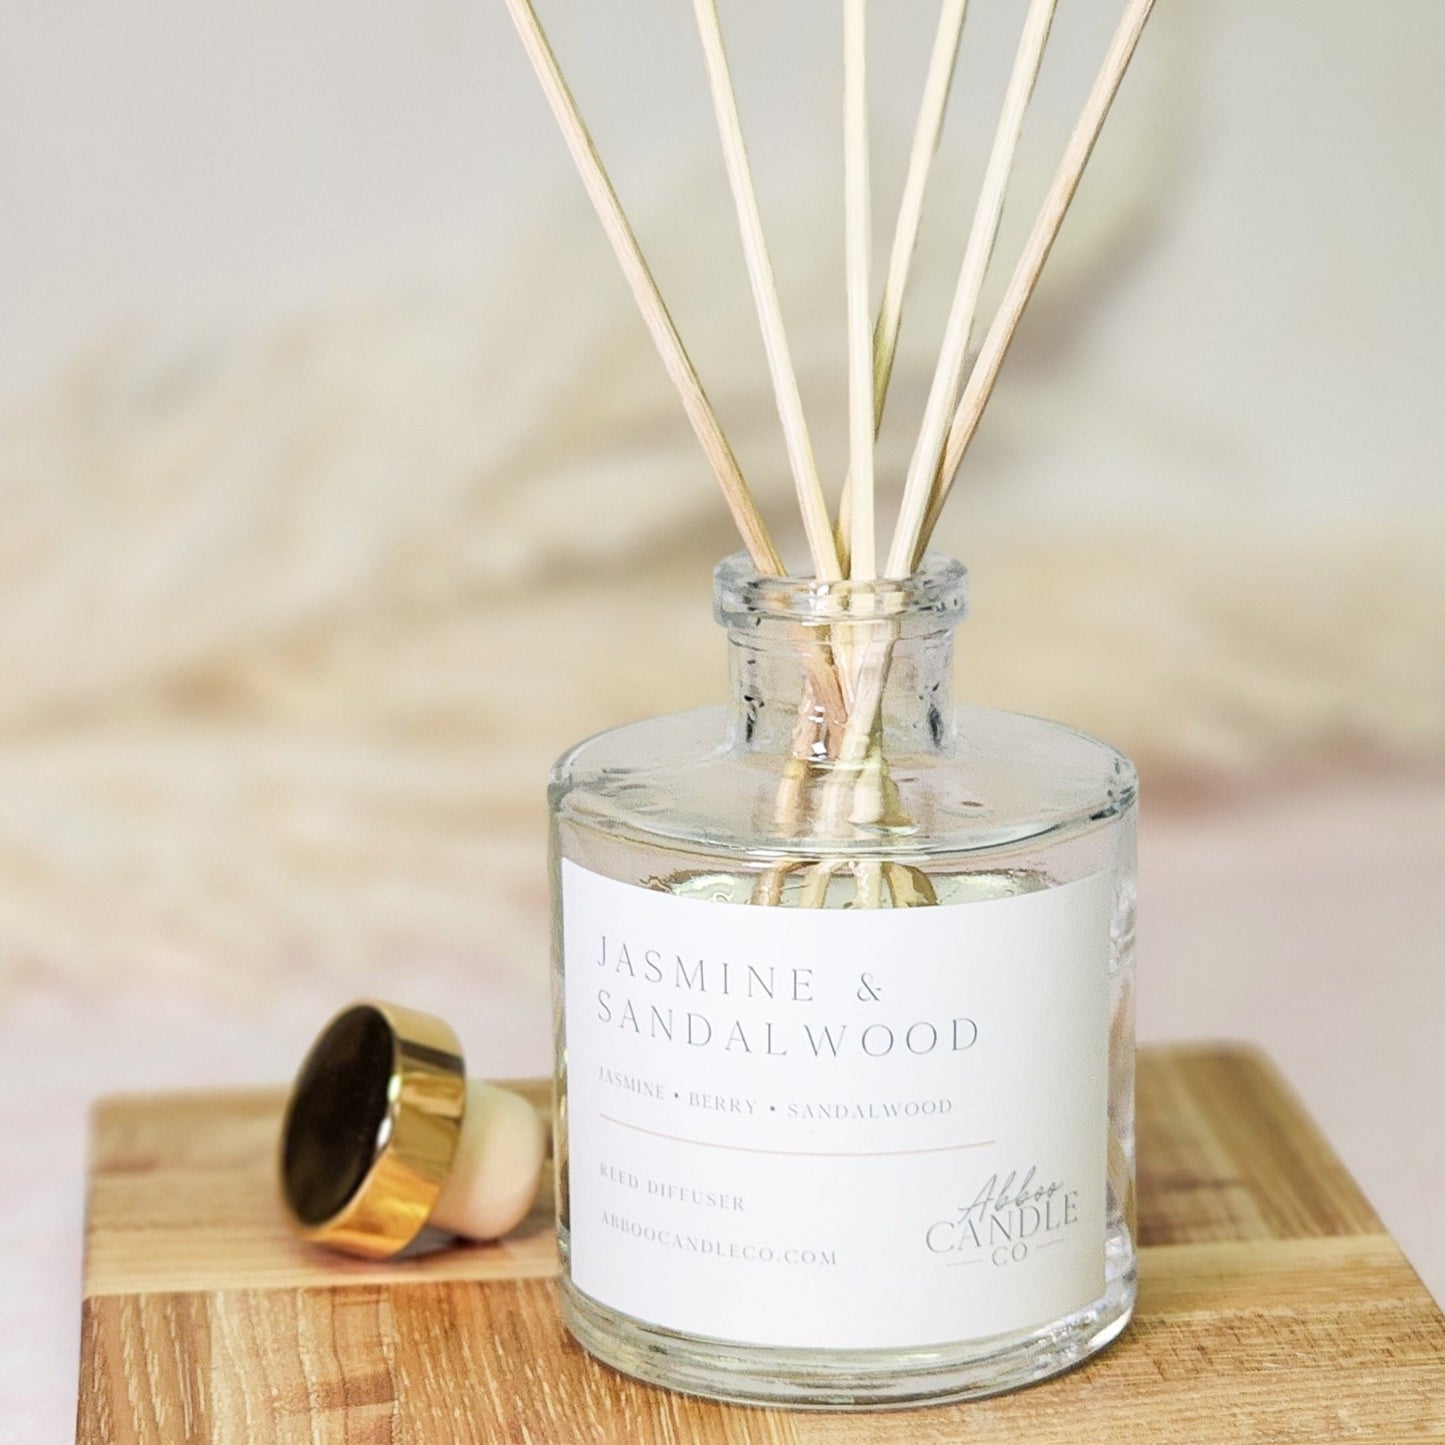 Jasmine and Sandalwood Reed Diffuser - Abboo Candle Co